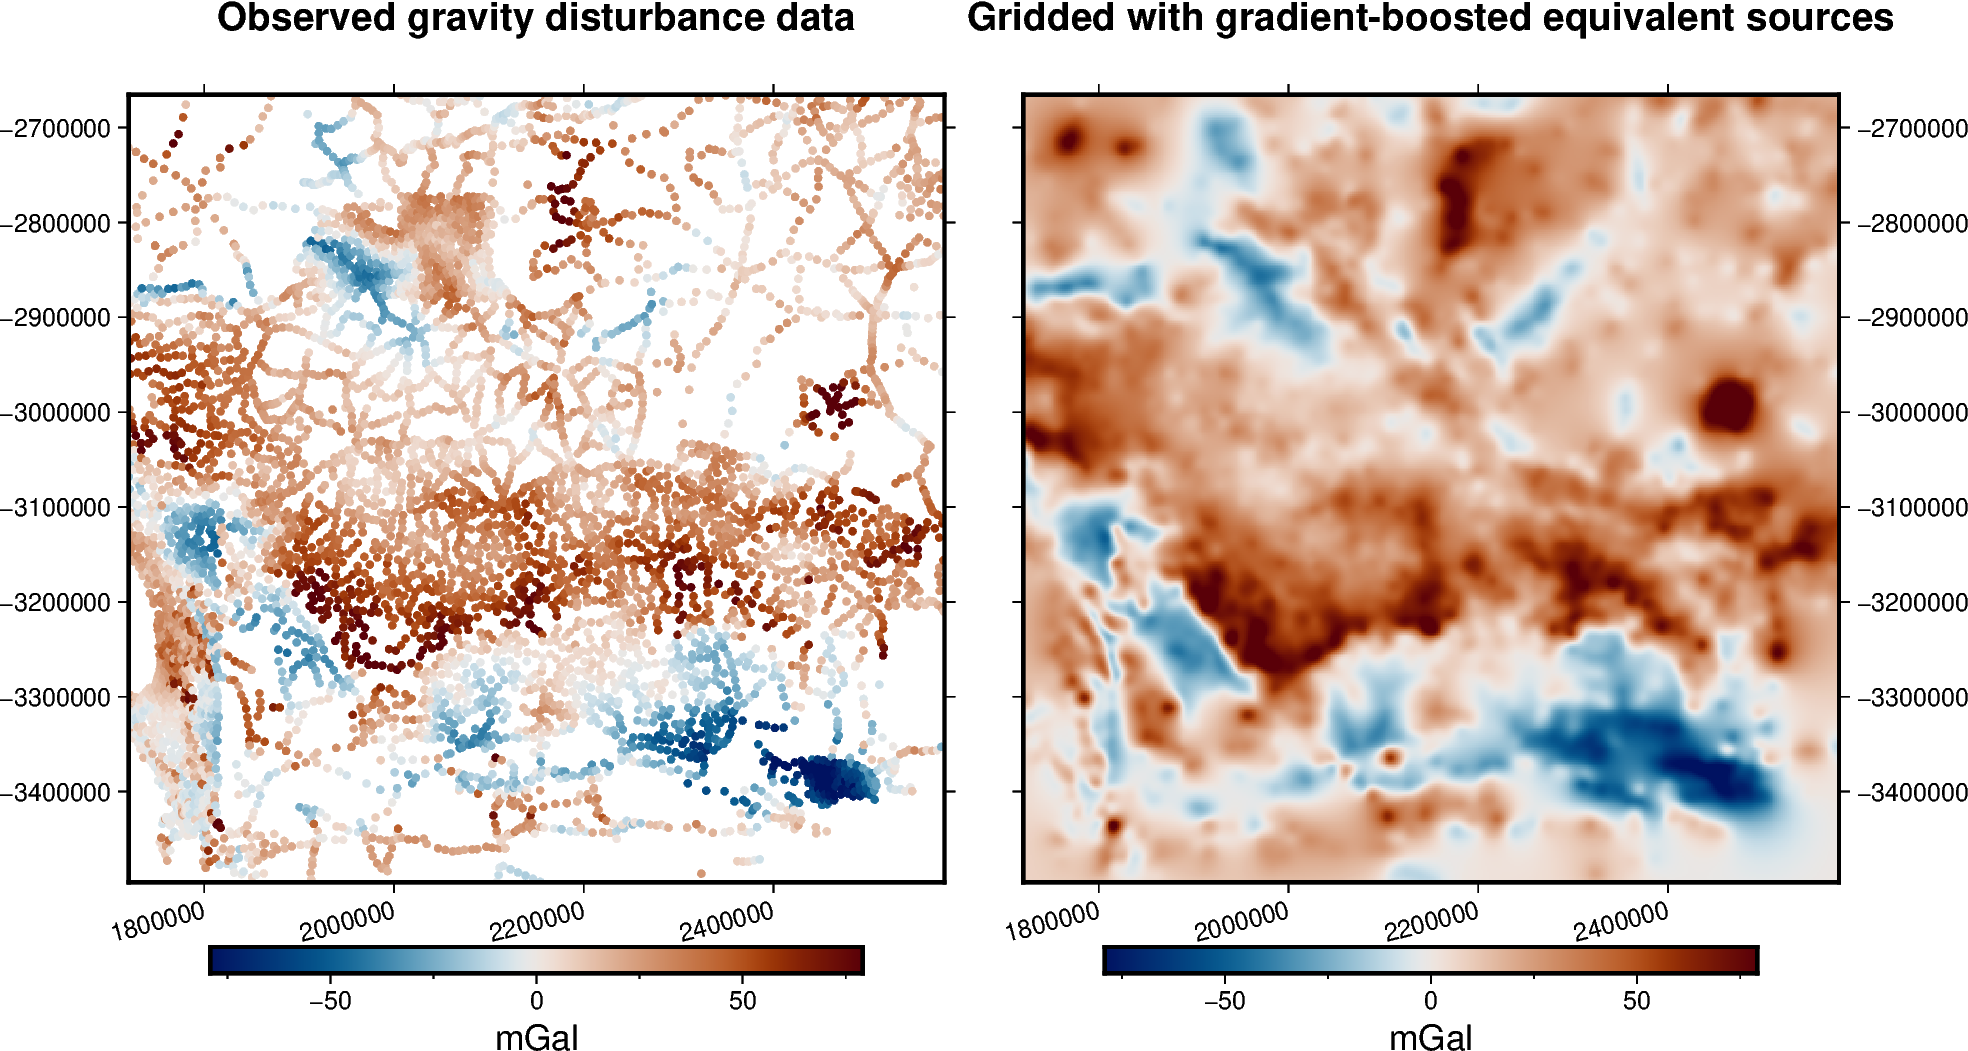 Observed gravity disturbance data, Gridded with gradient-boosted equivalent sources